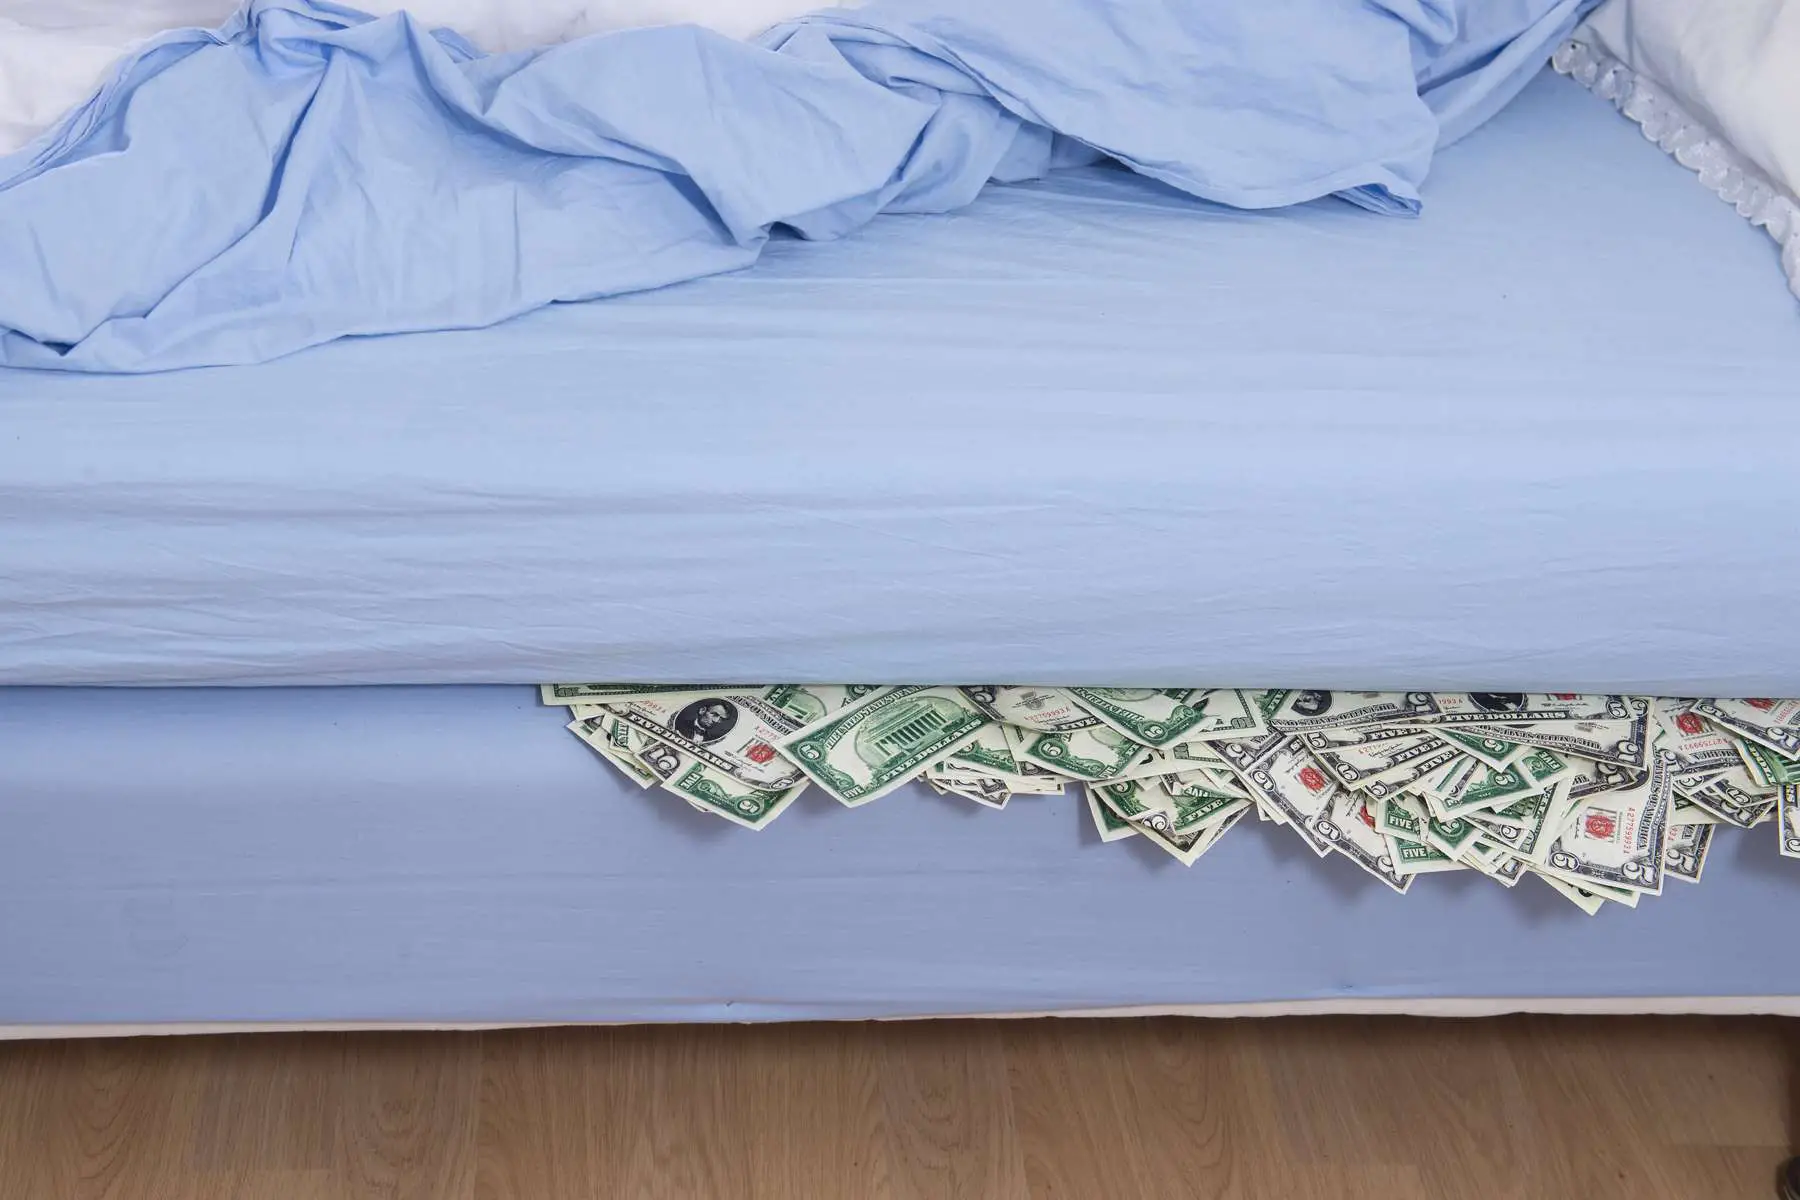 Mattress Firm to buy Sleep Train for $425M